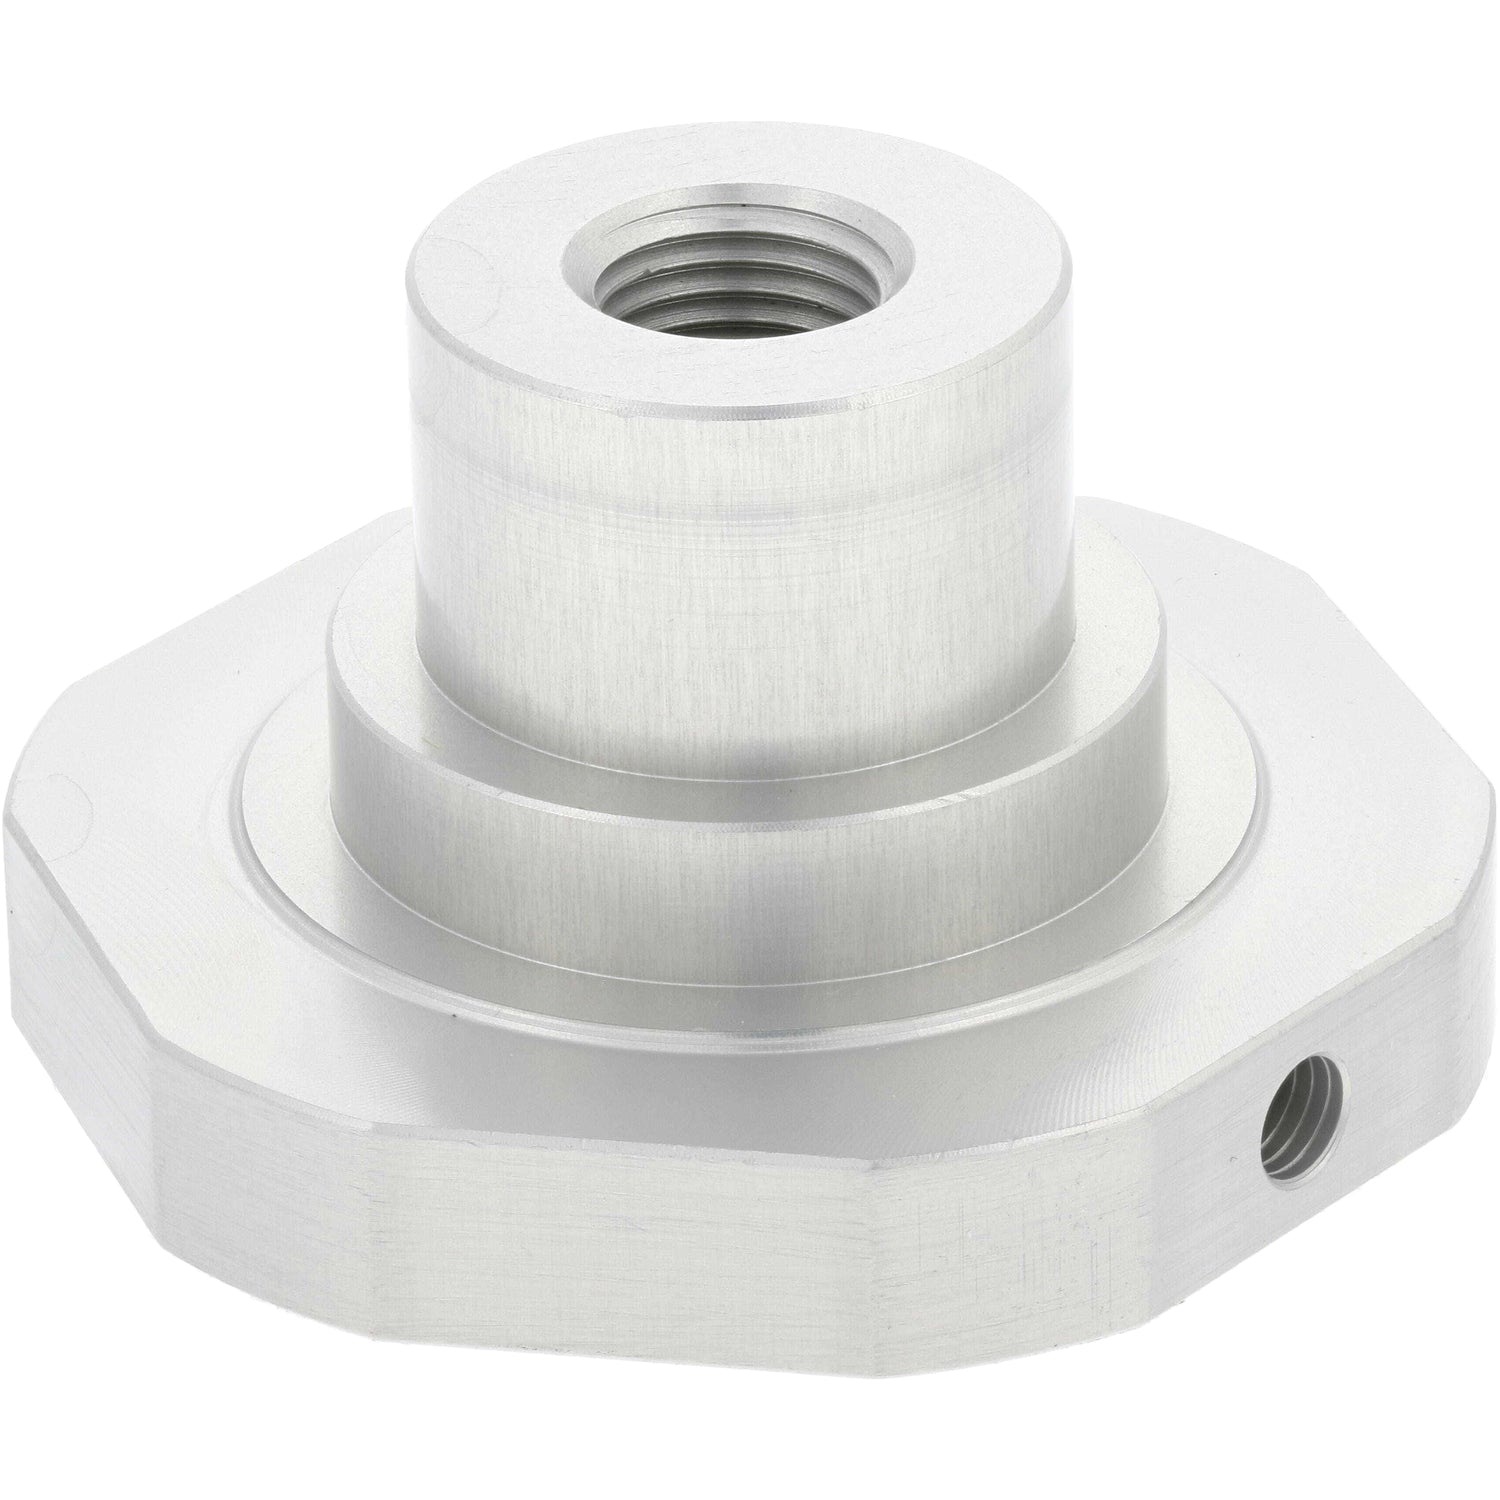 Grey aluminum machined part with cylindrical post on a decagonal base. A threaded hole passes through the center of the part and a smaller threaded is located on one of the base's flats. Part shown on white background.